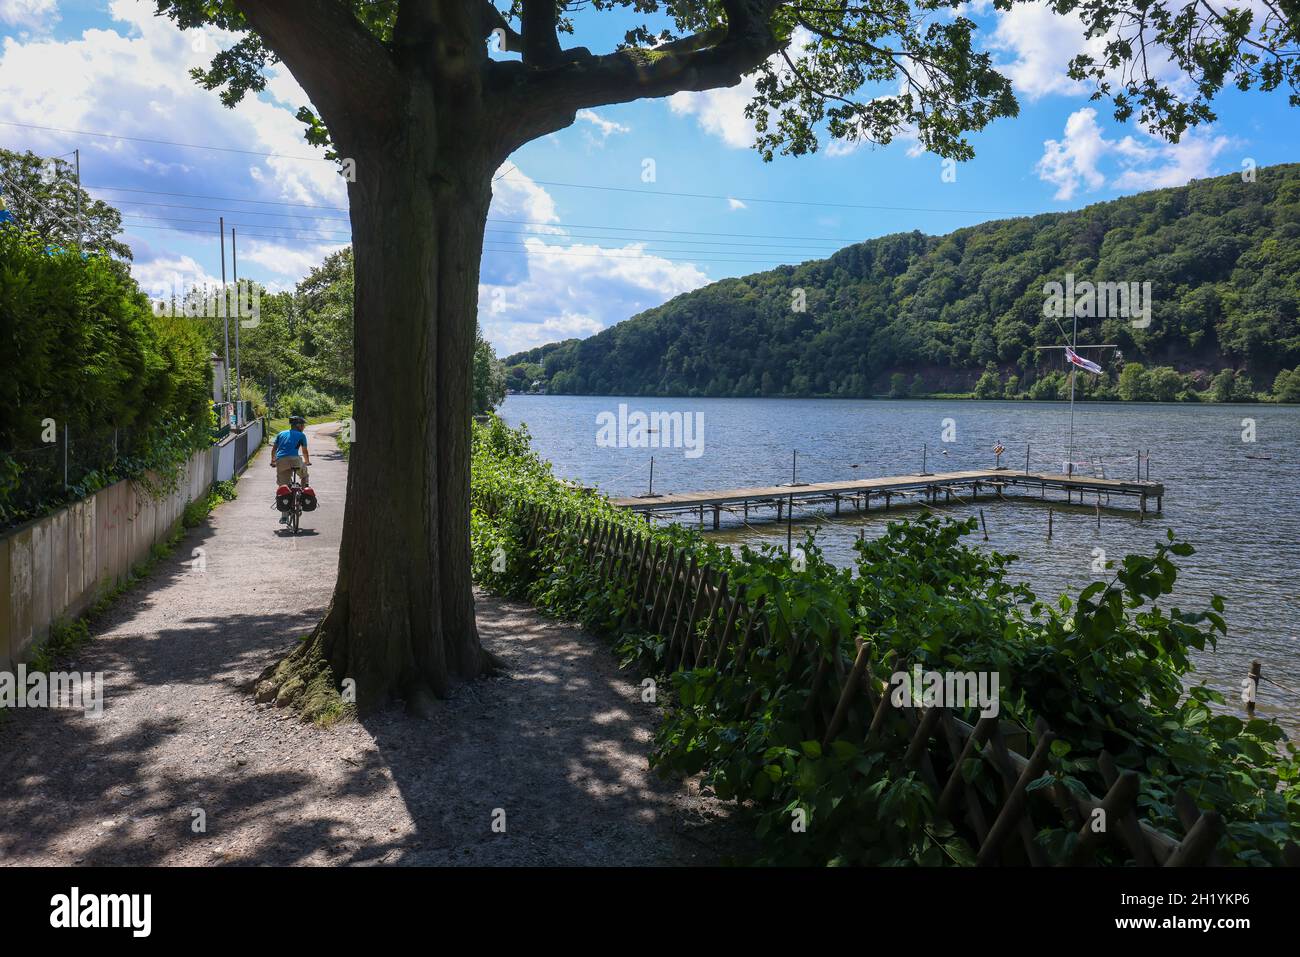 Hagen, North Rhine-Westphalia, Germany - Cyclists on the Ruhr Valley Cycle Path at Lake Hengstey, Lake Hengstey is a reservoir completed in 1929 and o Stock Photo